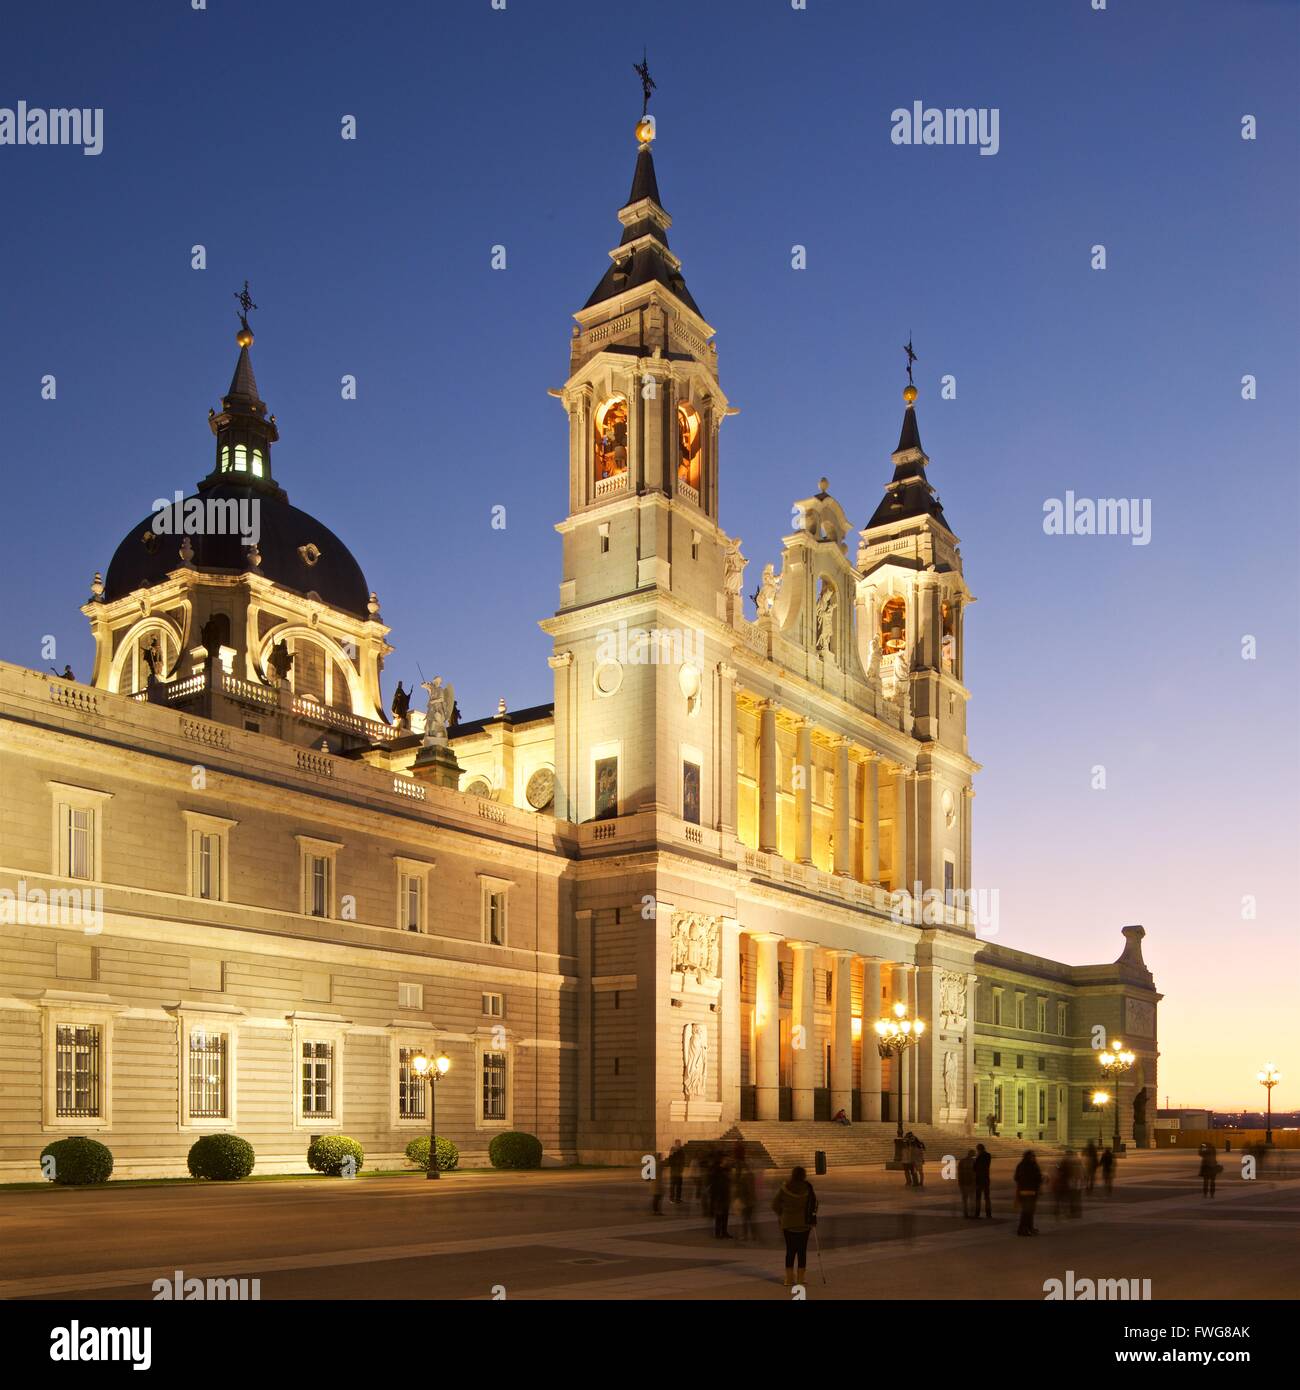 A travel image of Madrid at Almudena cathedral taken at dusk Stock Photo